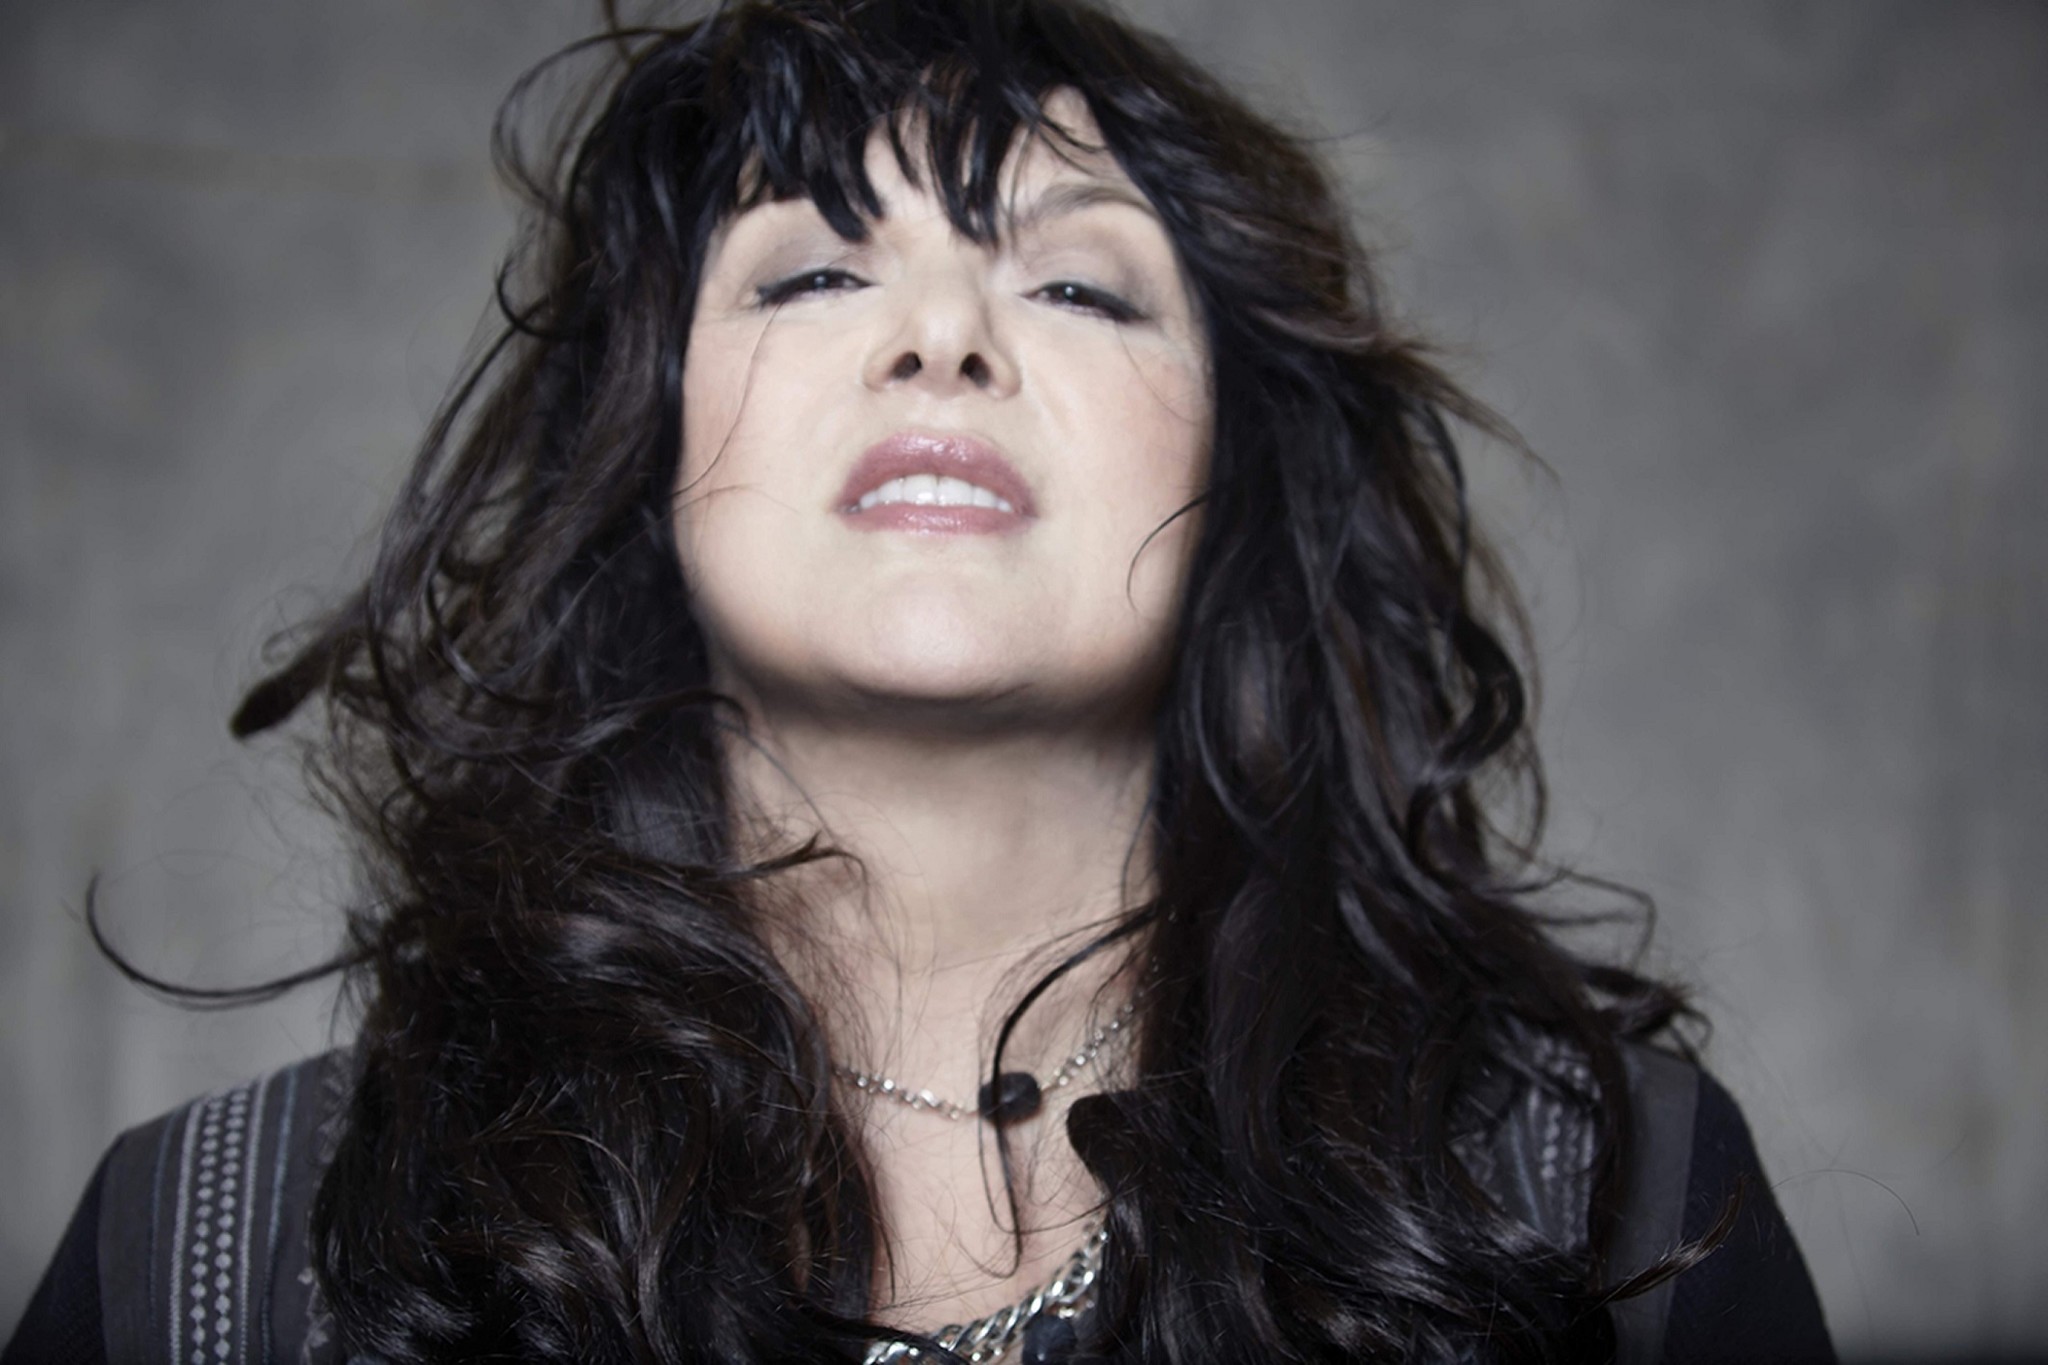 Interviewing Ann Wilson of Heart: EPs, solo tour coming to Keswick Theater, designed to bring back magic, man - Allentown Morning Call